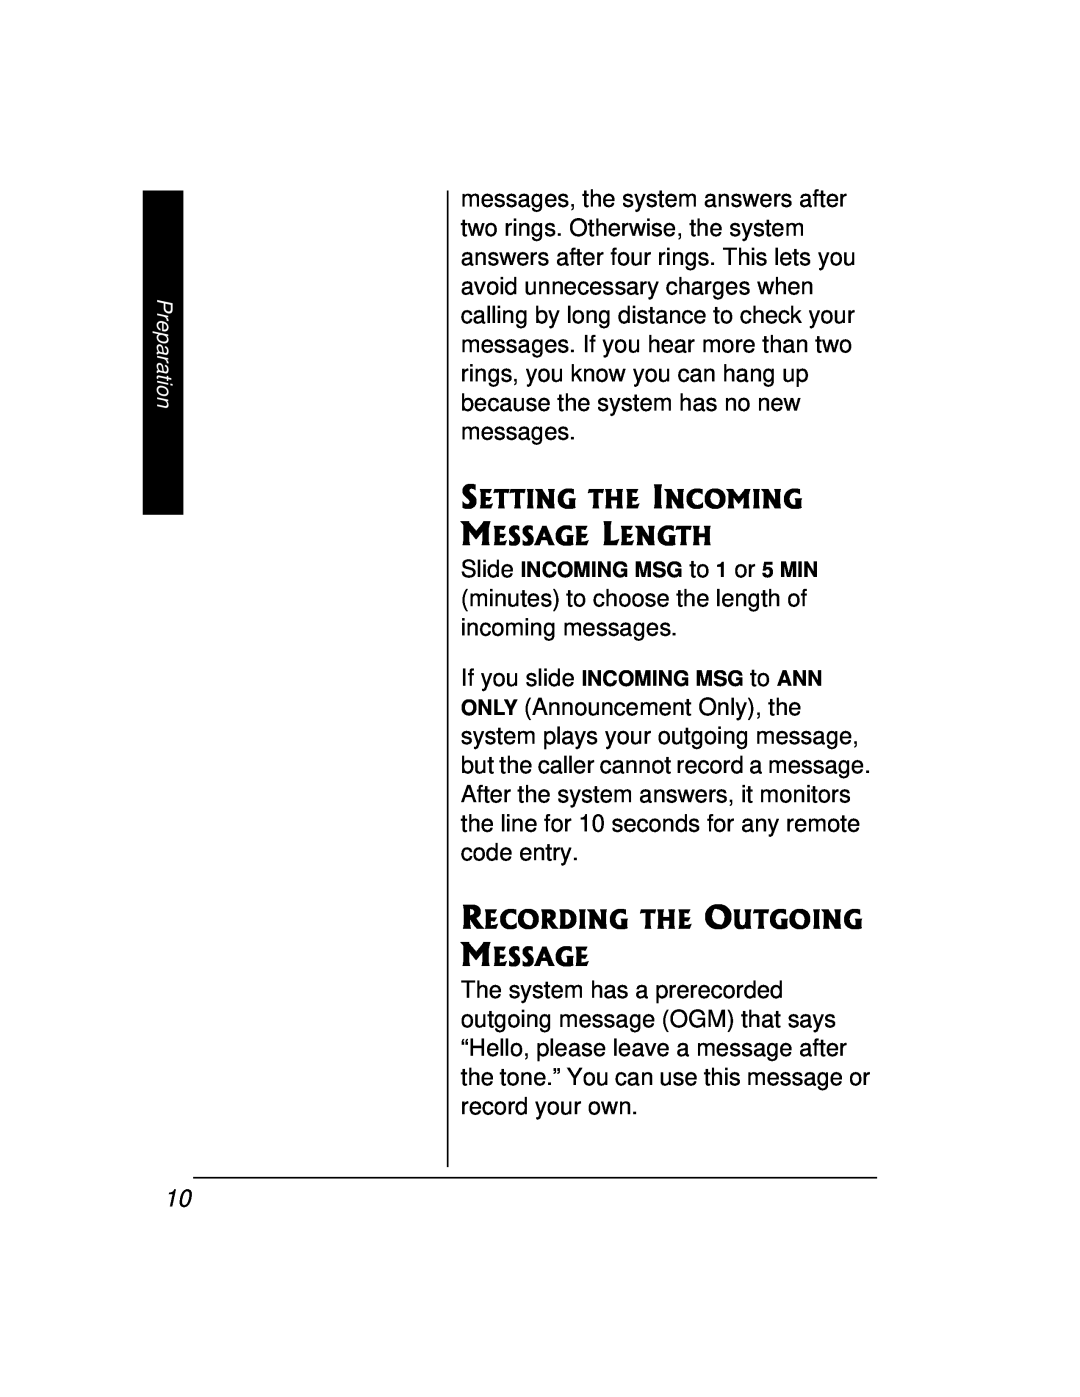 Radio Shack 43-3888 owner manual Setting The Incoming Message Length, Recording The Outgoing Message 